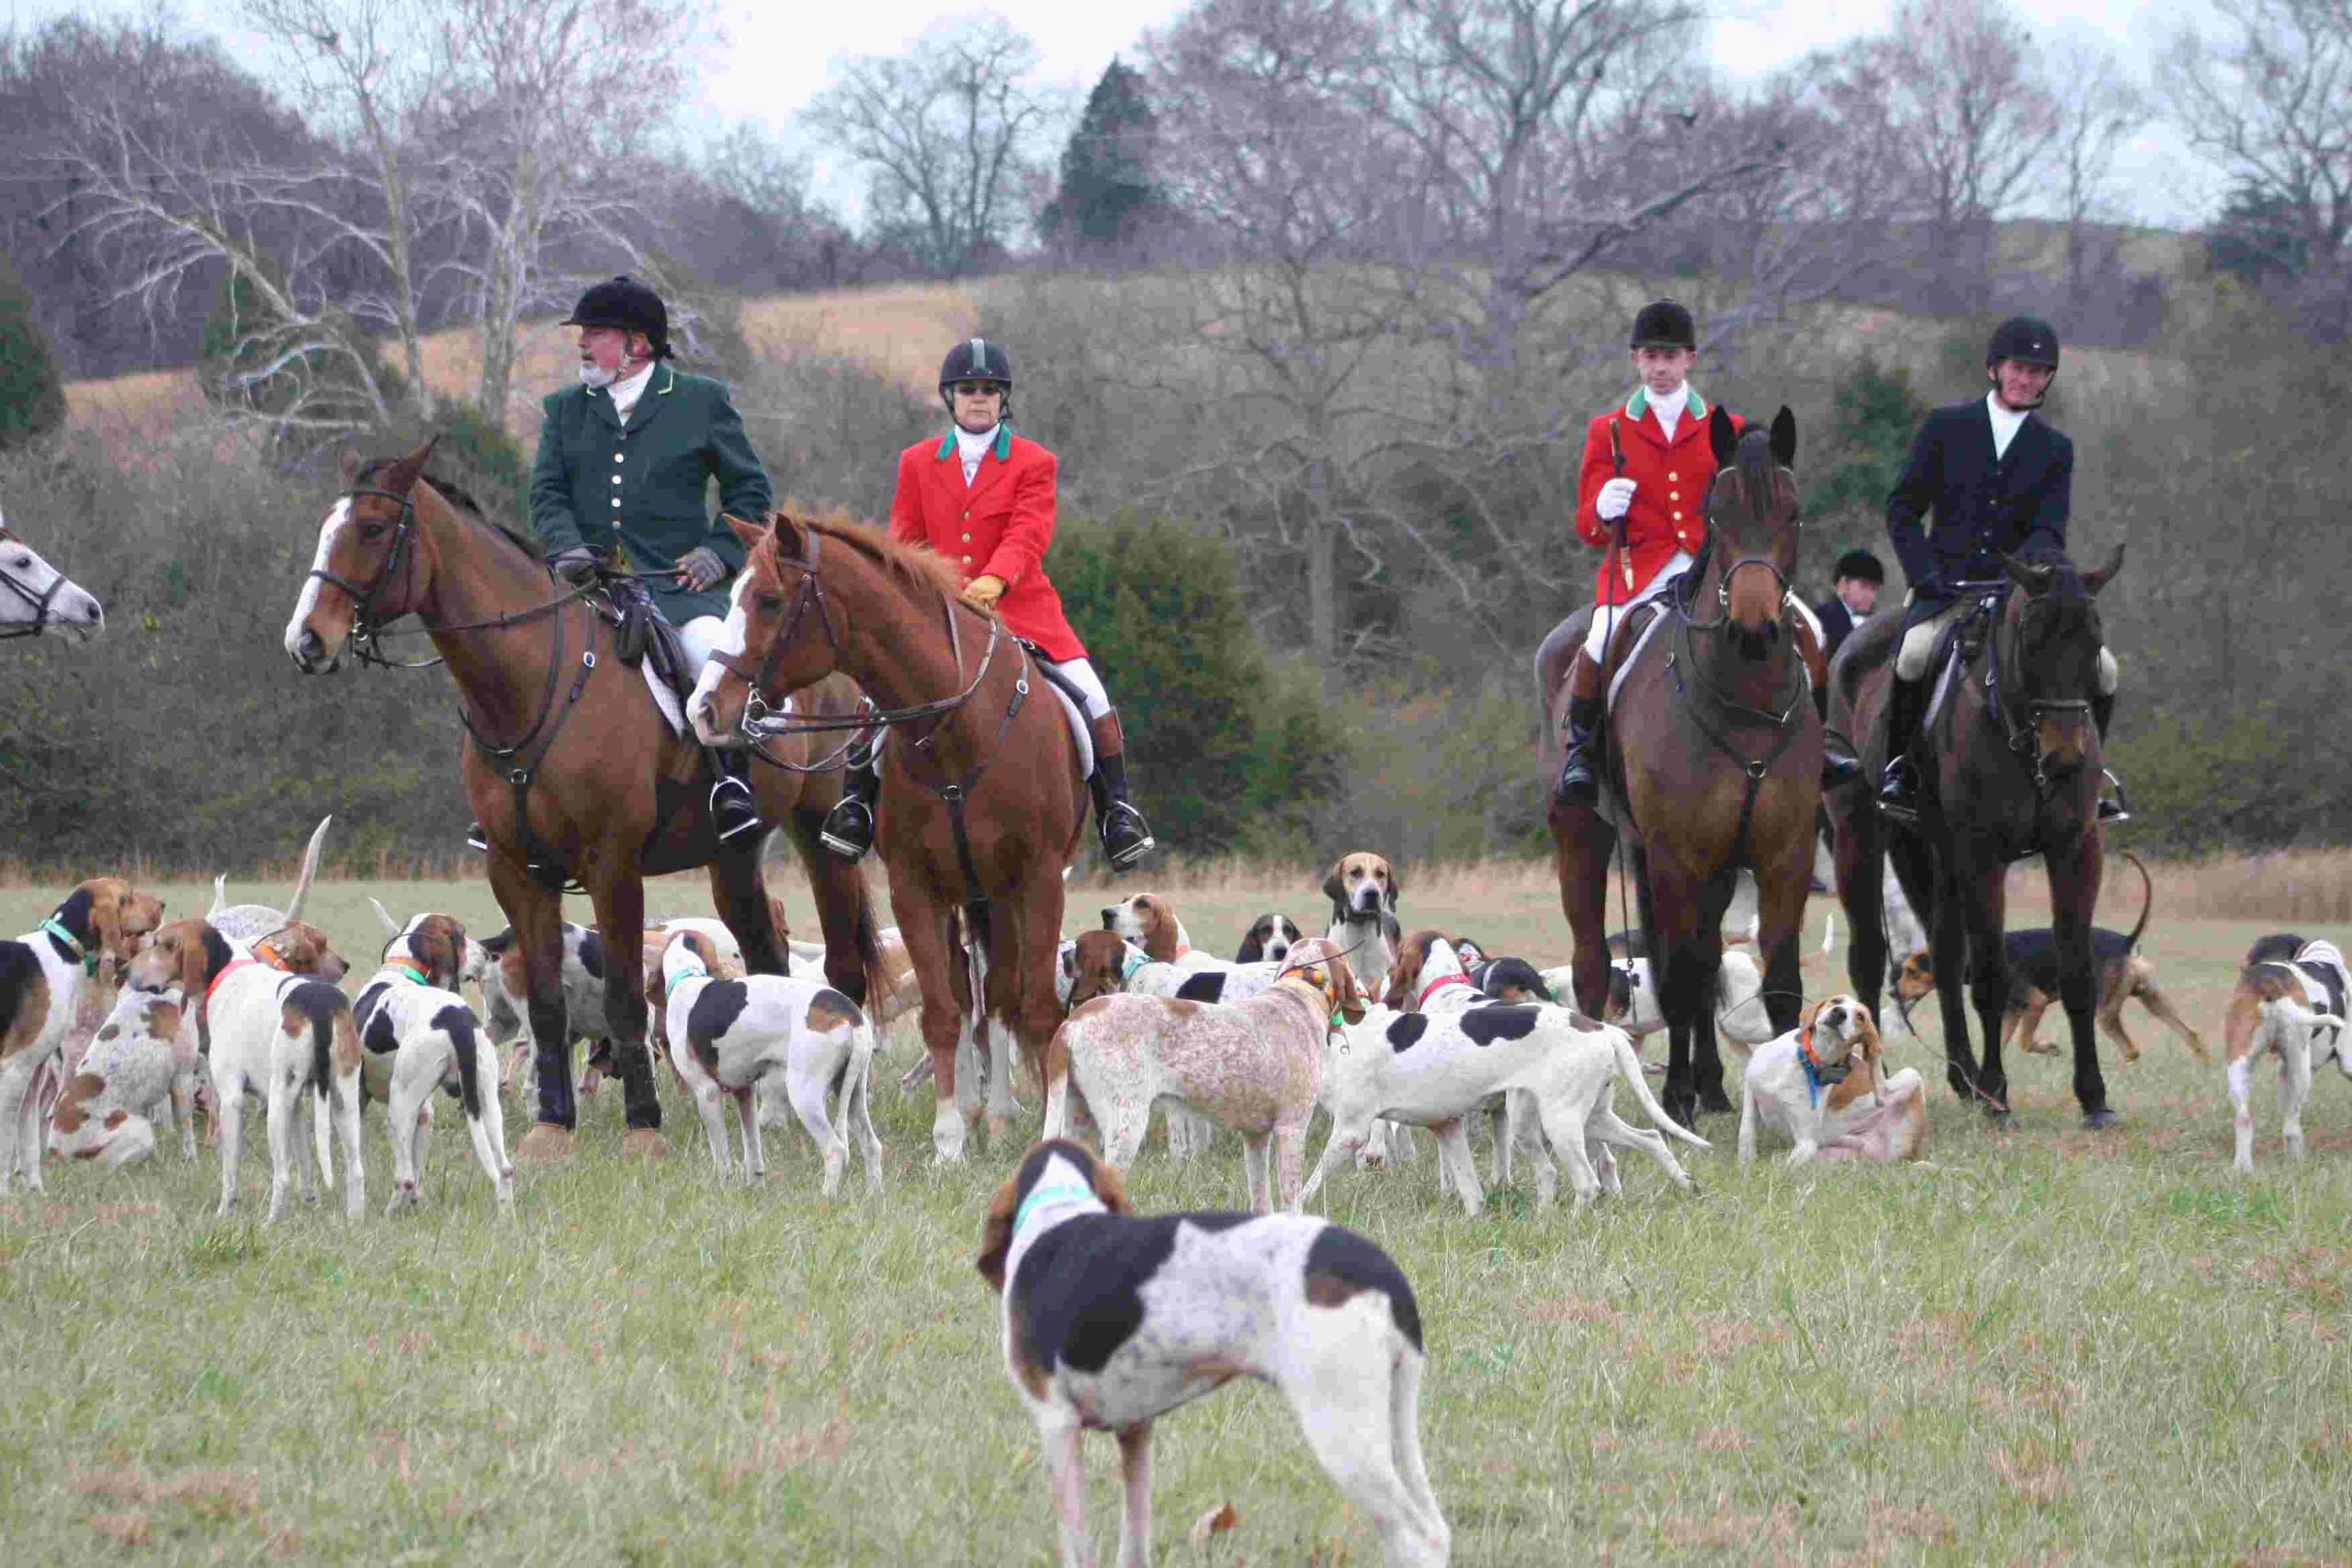 hounds and horses with riders standing for photo